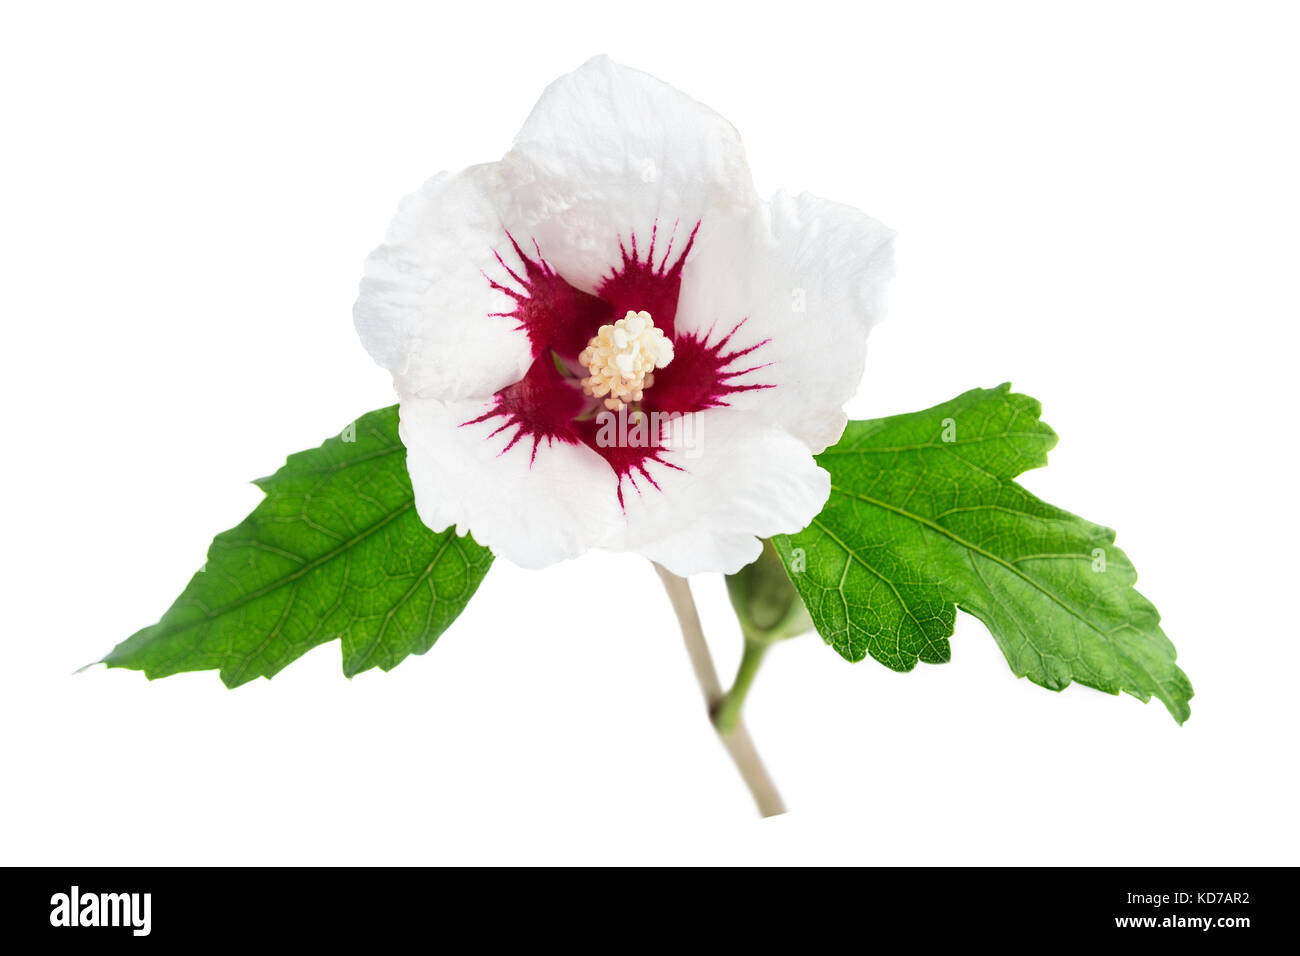 White hibiscus with red in the center, with leaves, isolated on white background Stock Photo